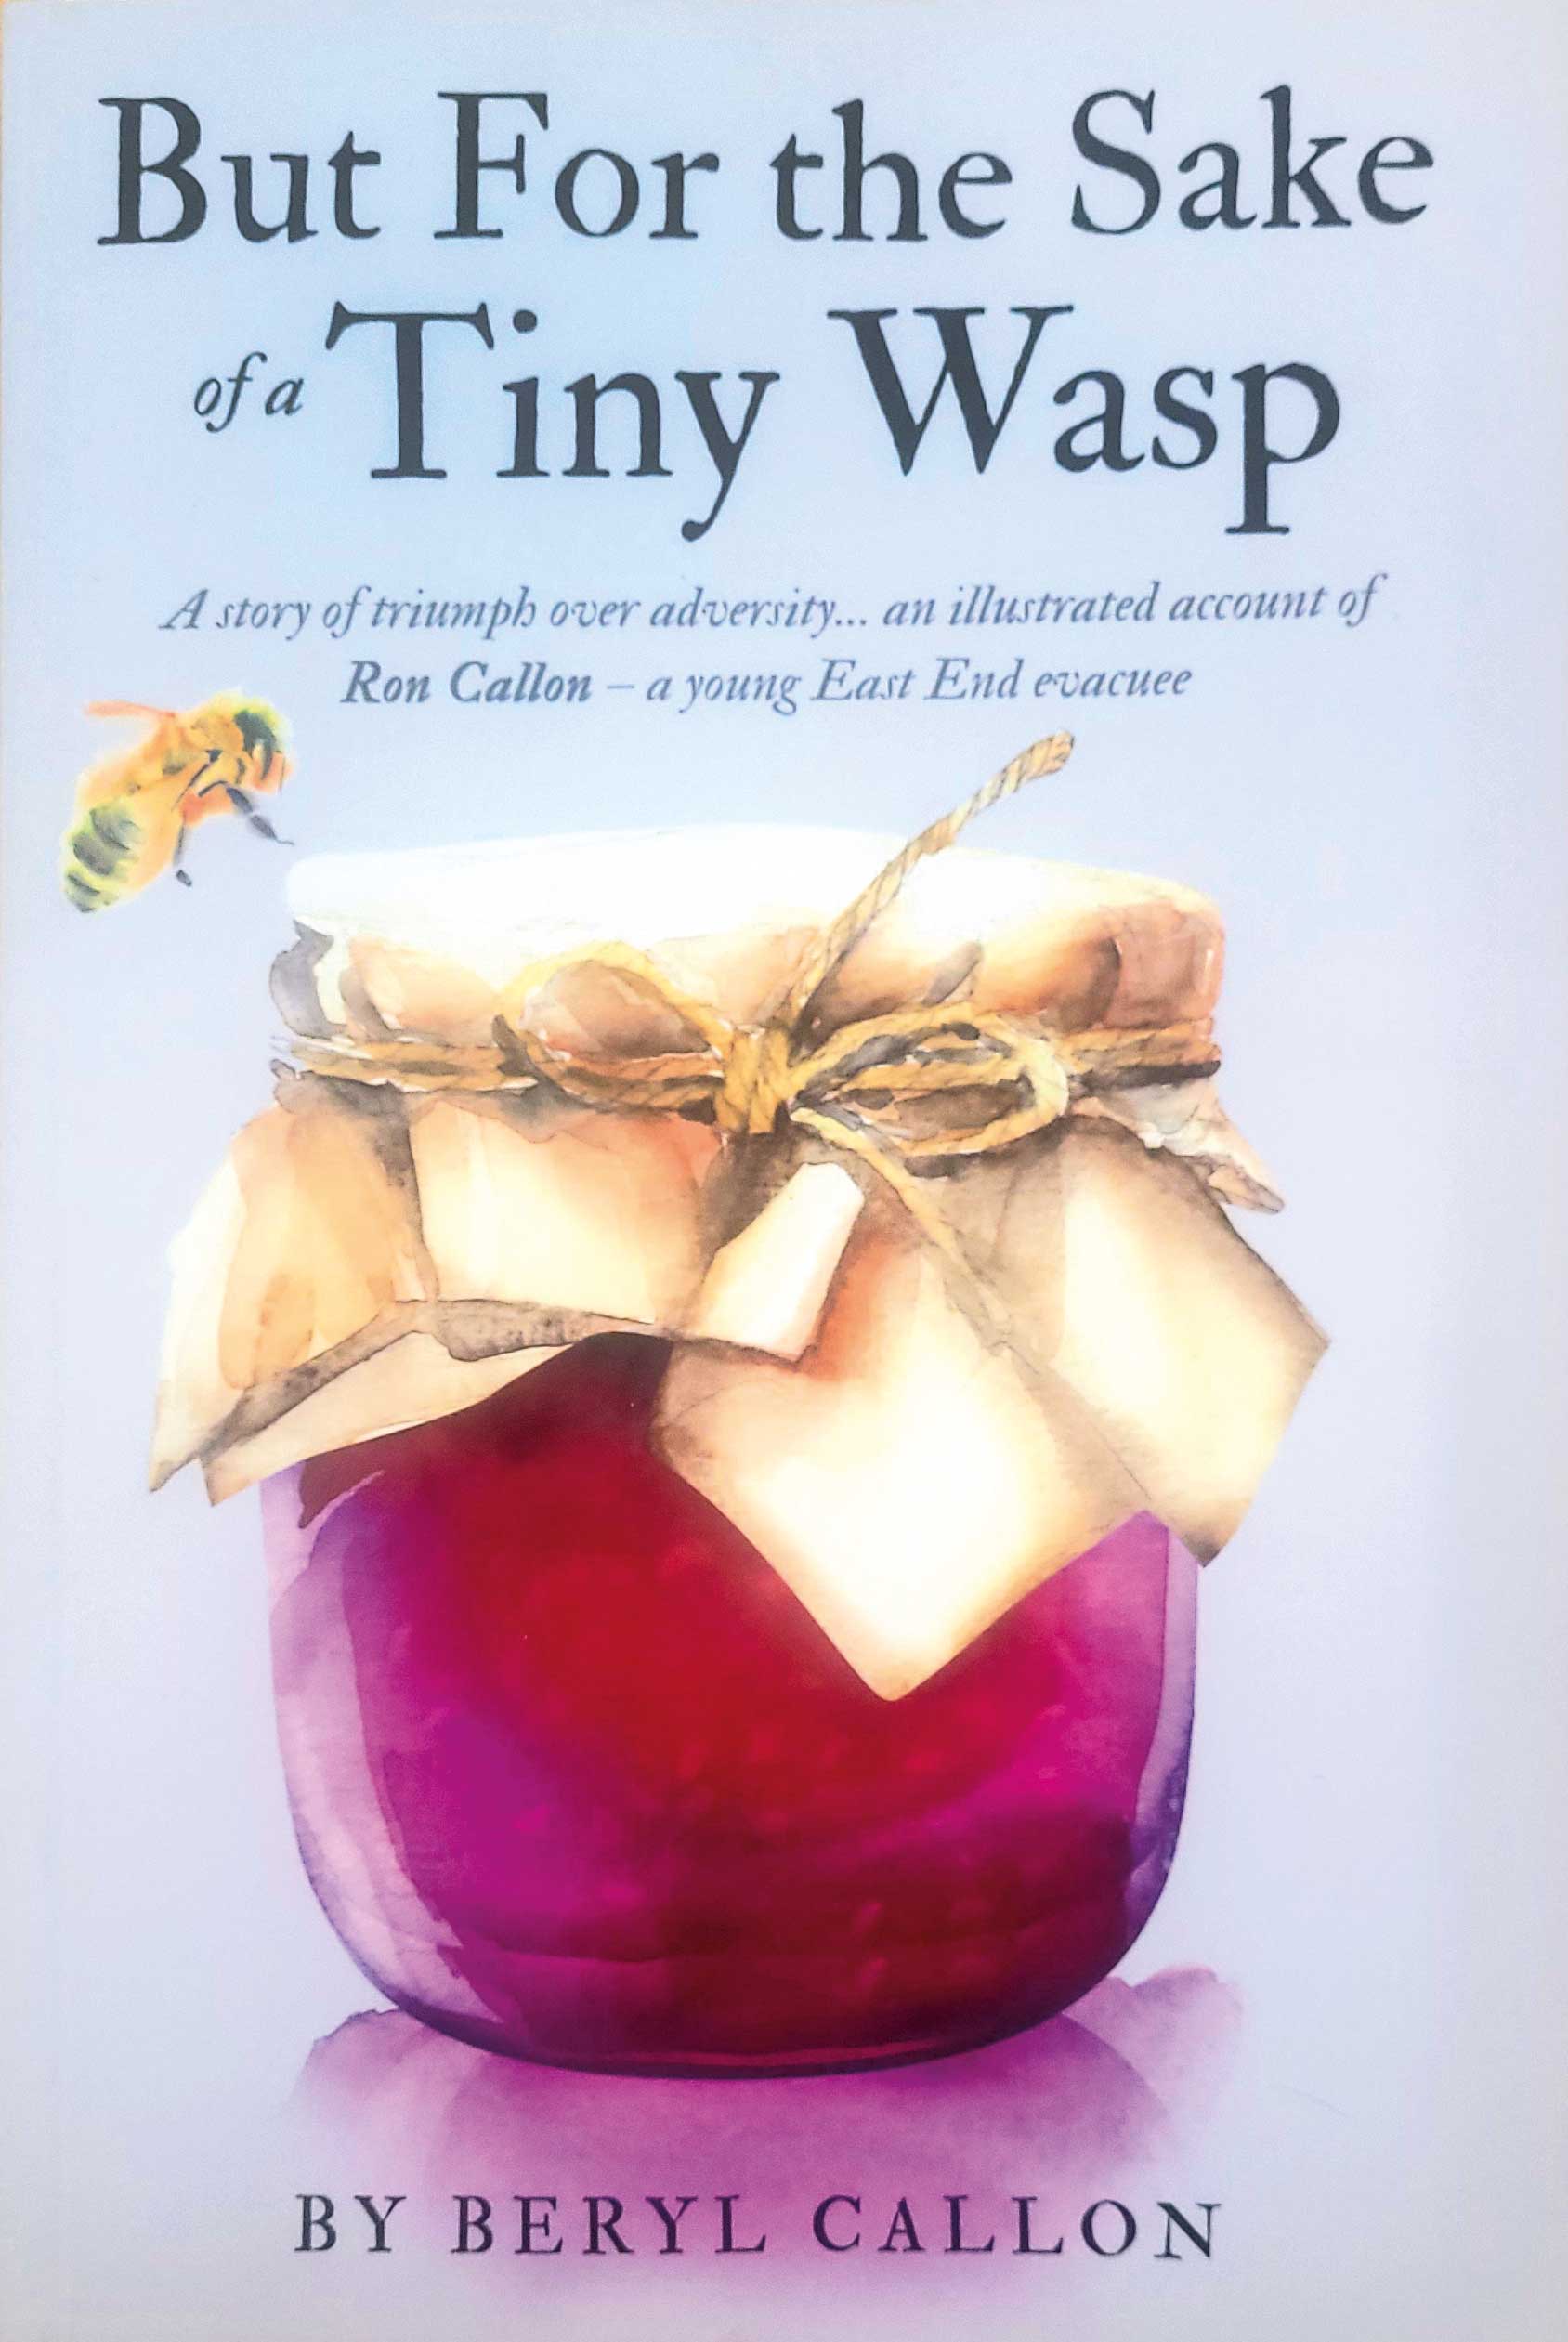 For the sake of a tiny wasp by beryl callon